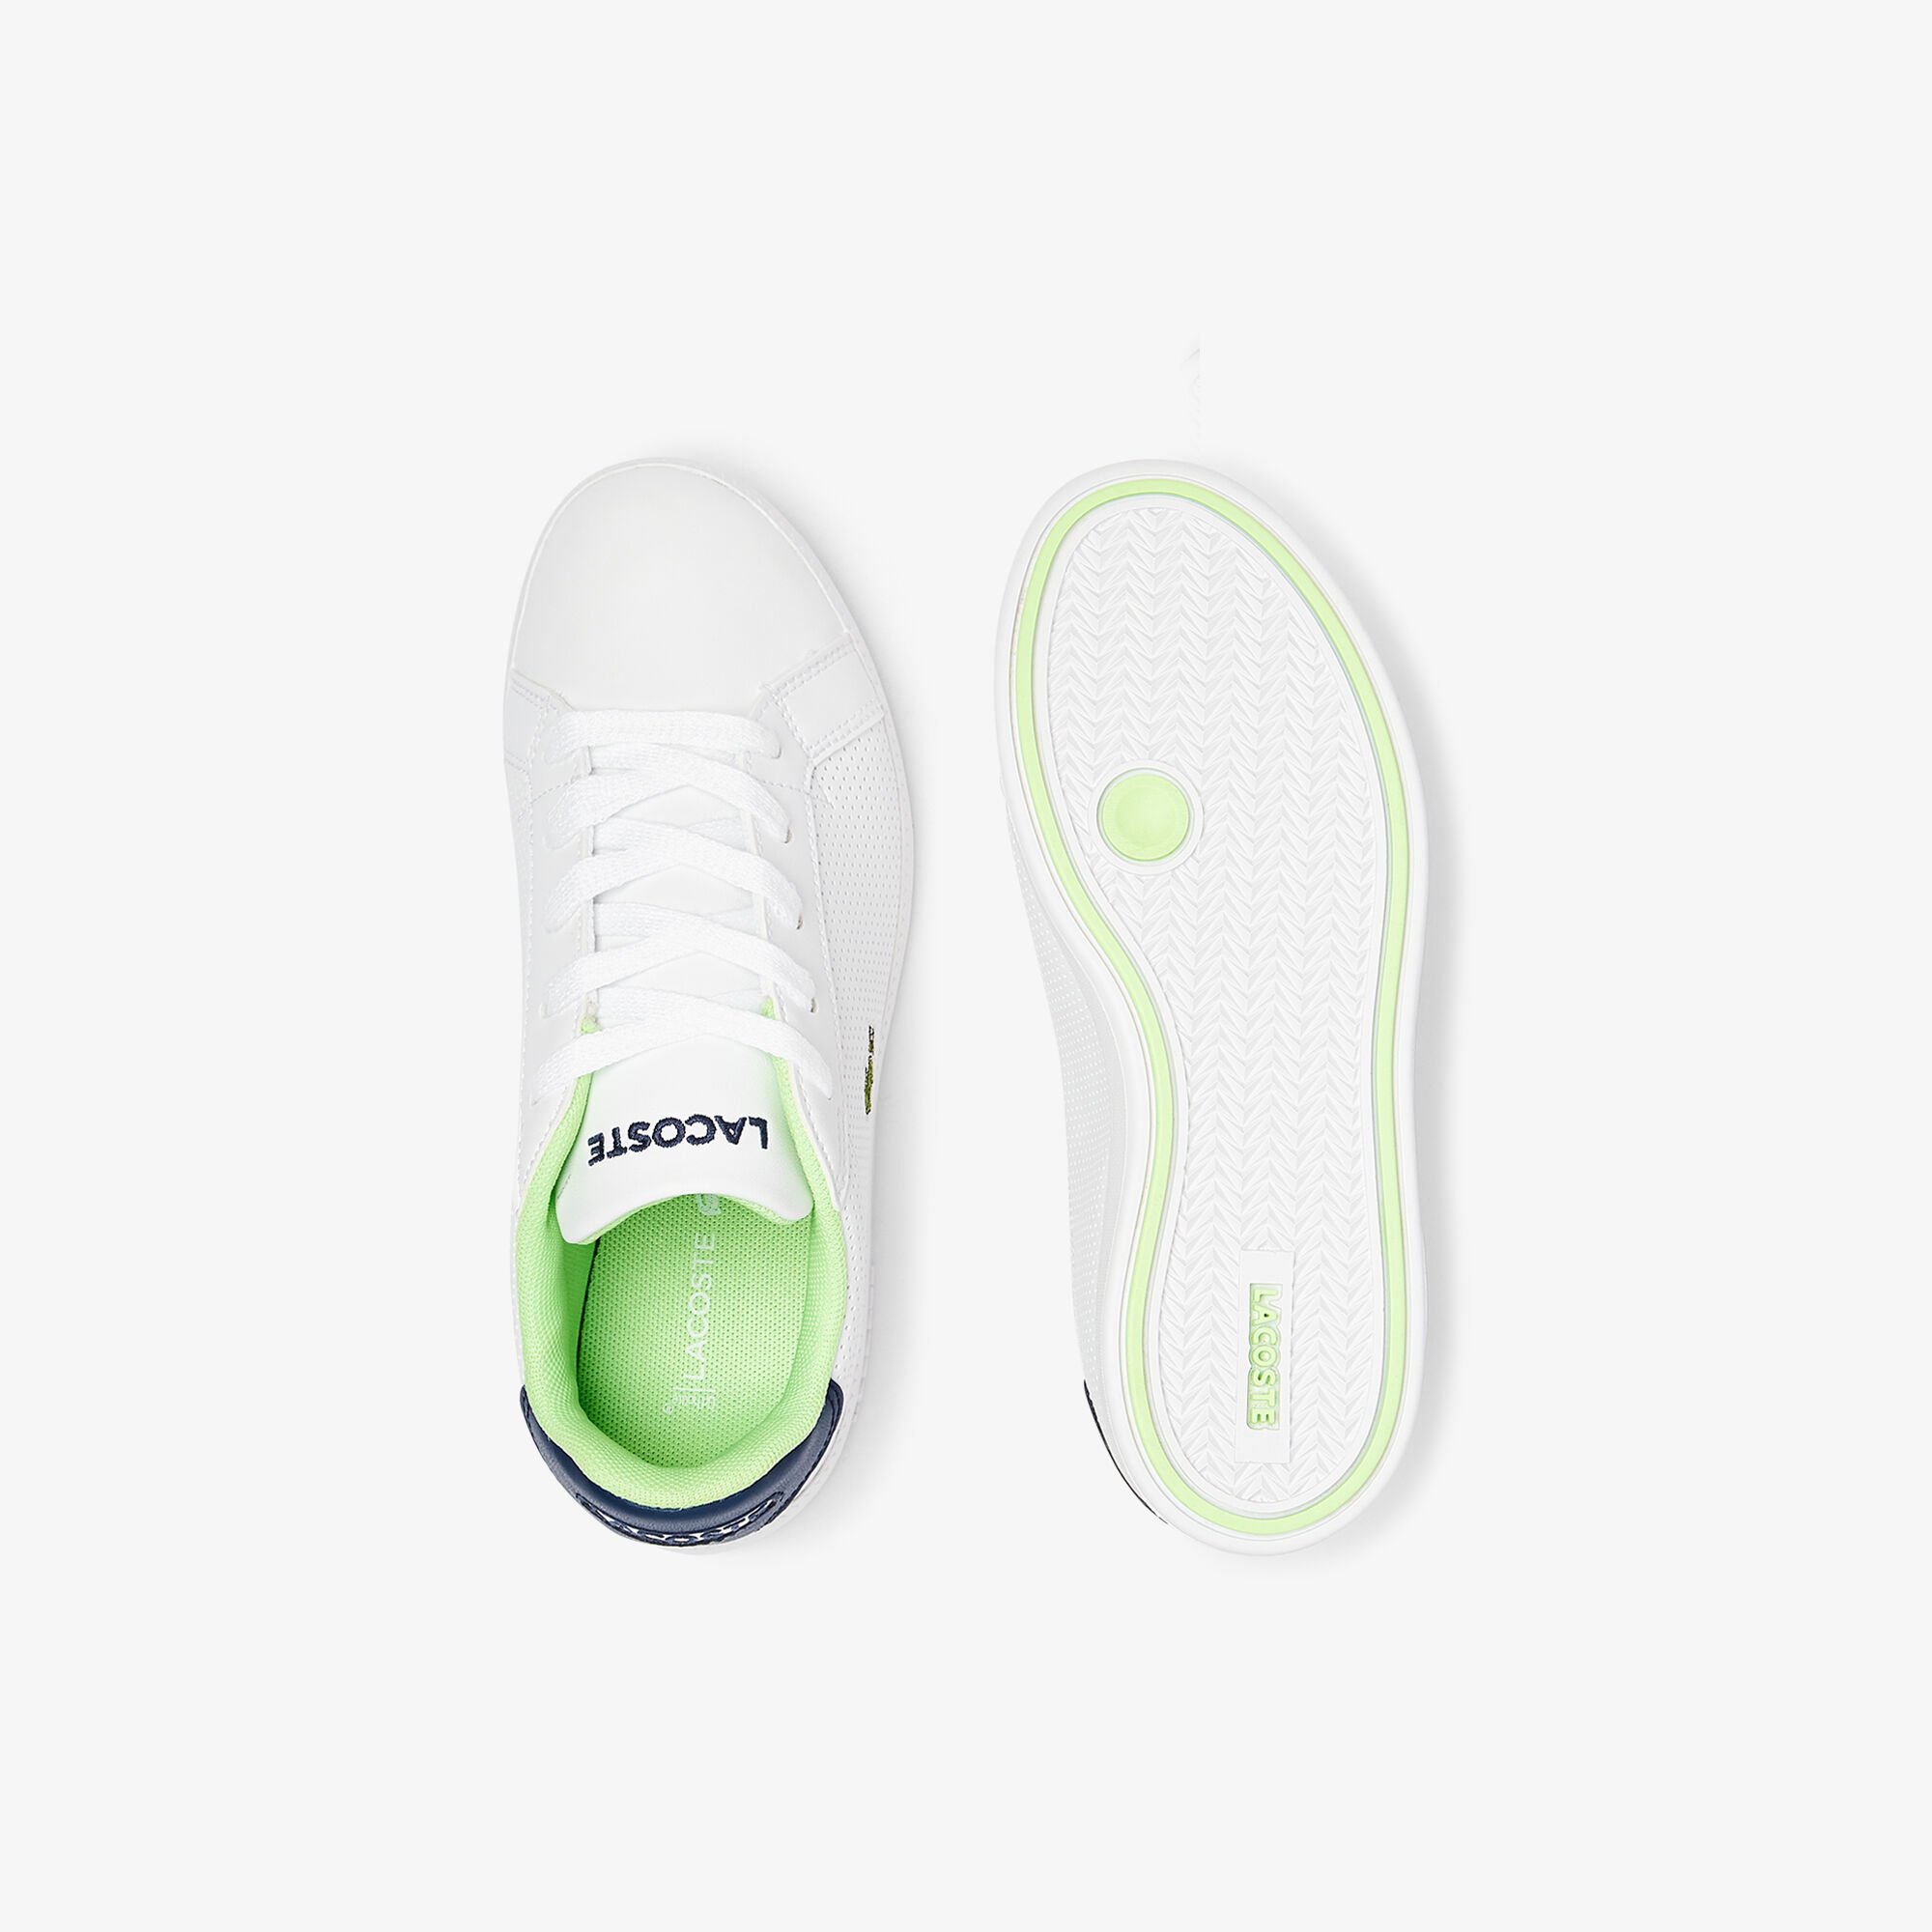 Children's Graduate Synthetic Perforated Trainers